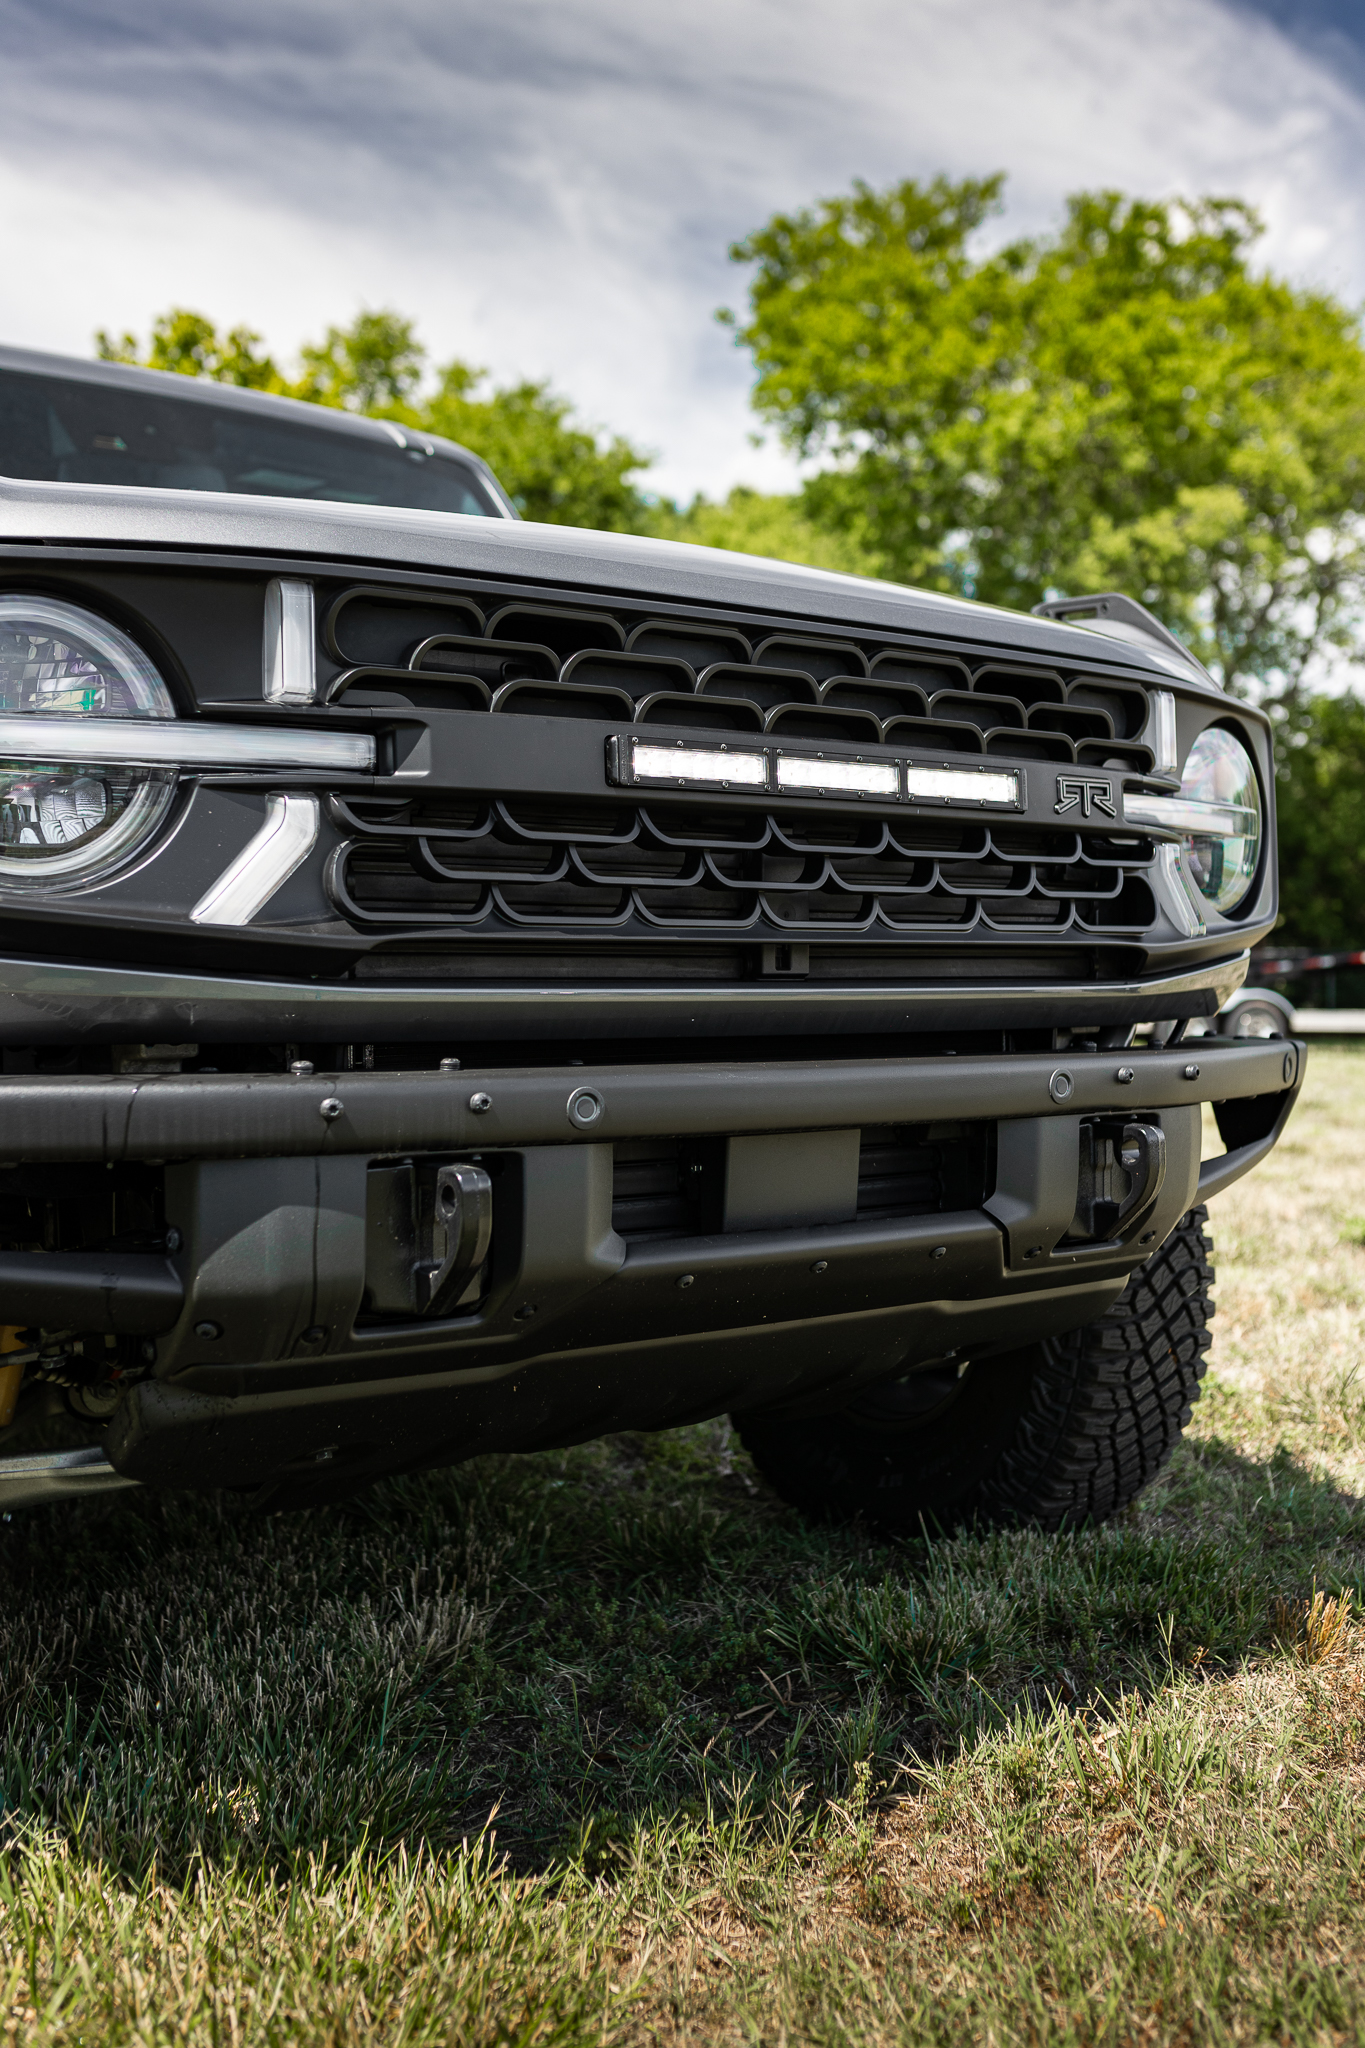 Ford Bronco Lighting Options from RTR Vehicles 8F5A9302